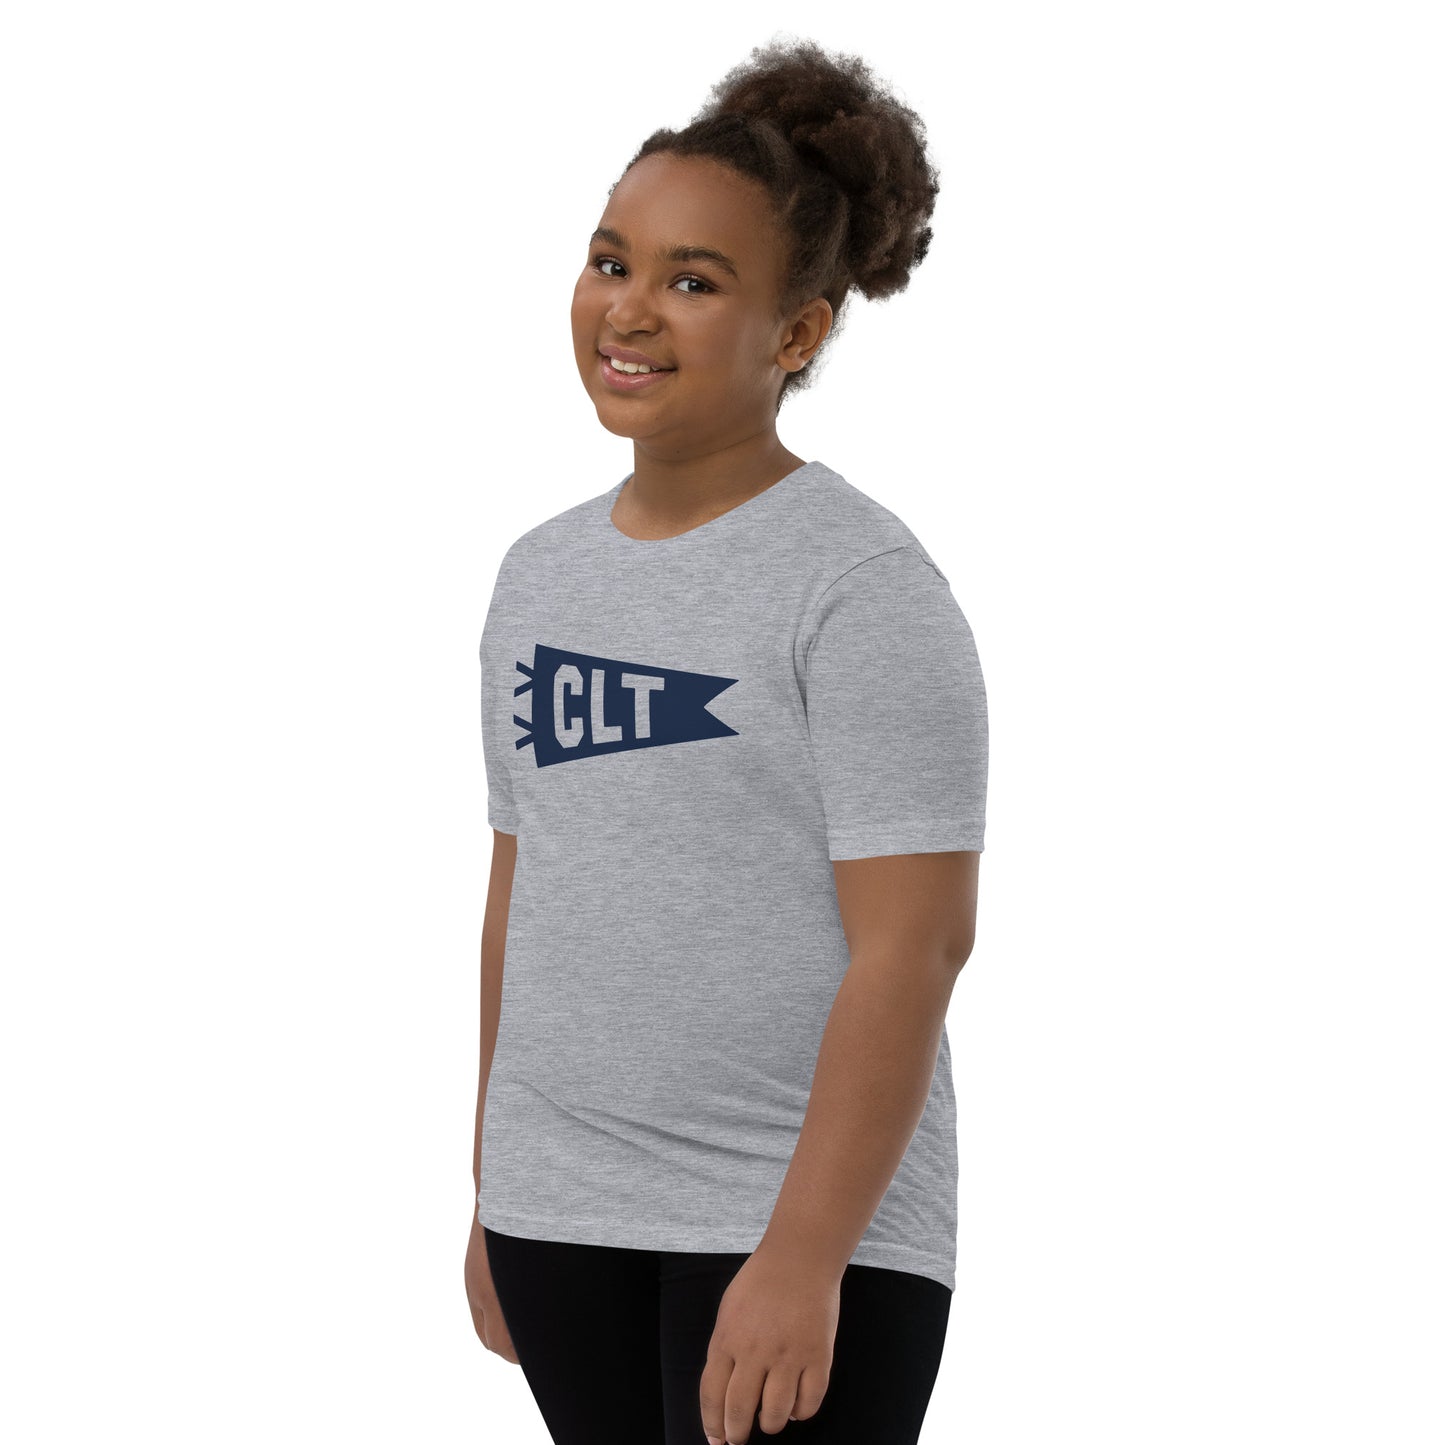 Kid's Airport Code Tee - Navy Blue Graphic • CLT Charlotte • YHM Designs - Image 04